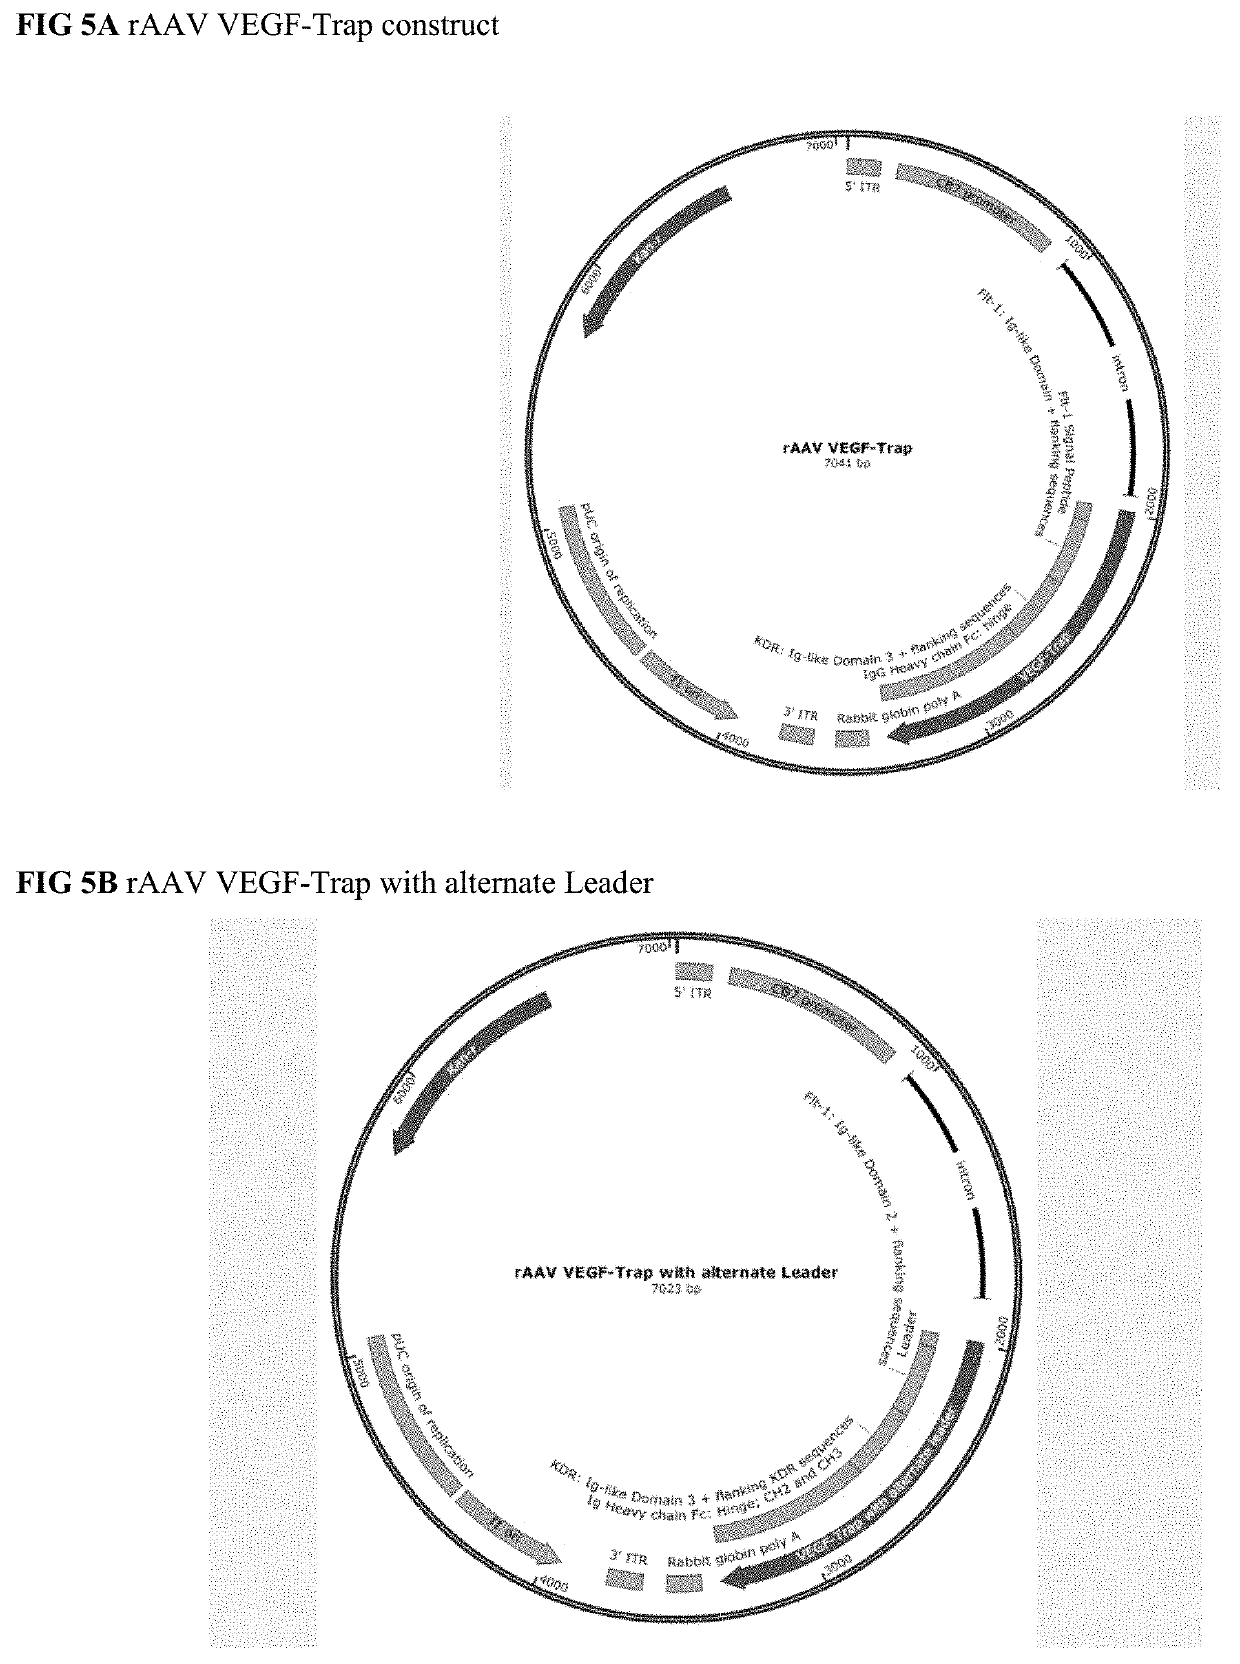 Treatment of ocular diseases with human post-translationally modified vegf-trap